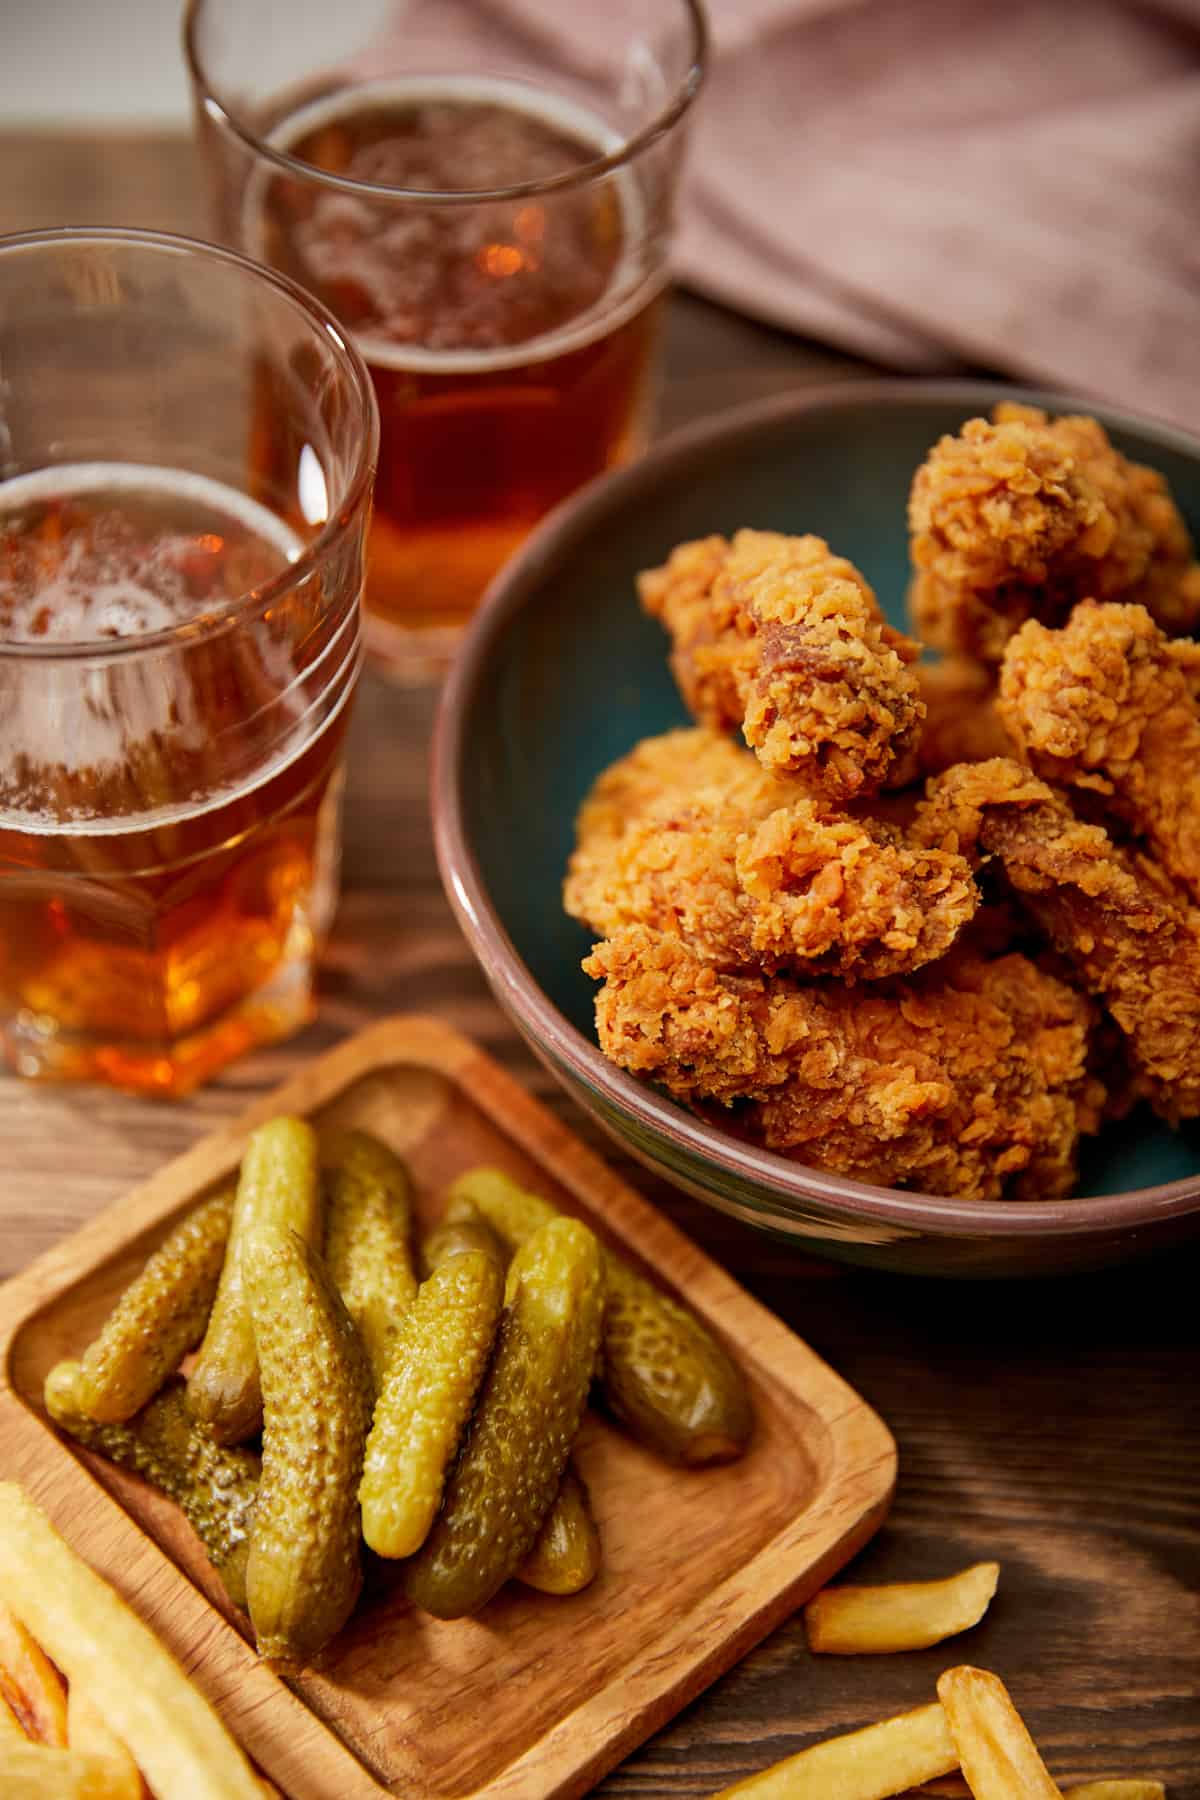 Breaded chicken tenders, pickles and beer on a table to show pub food.